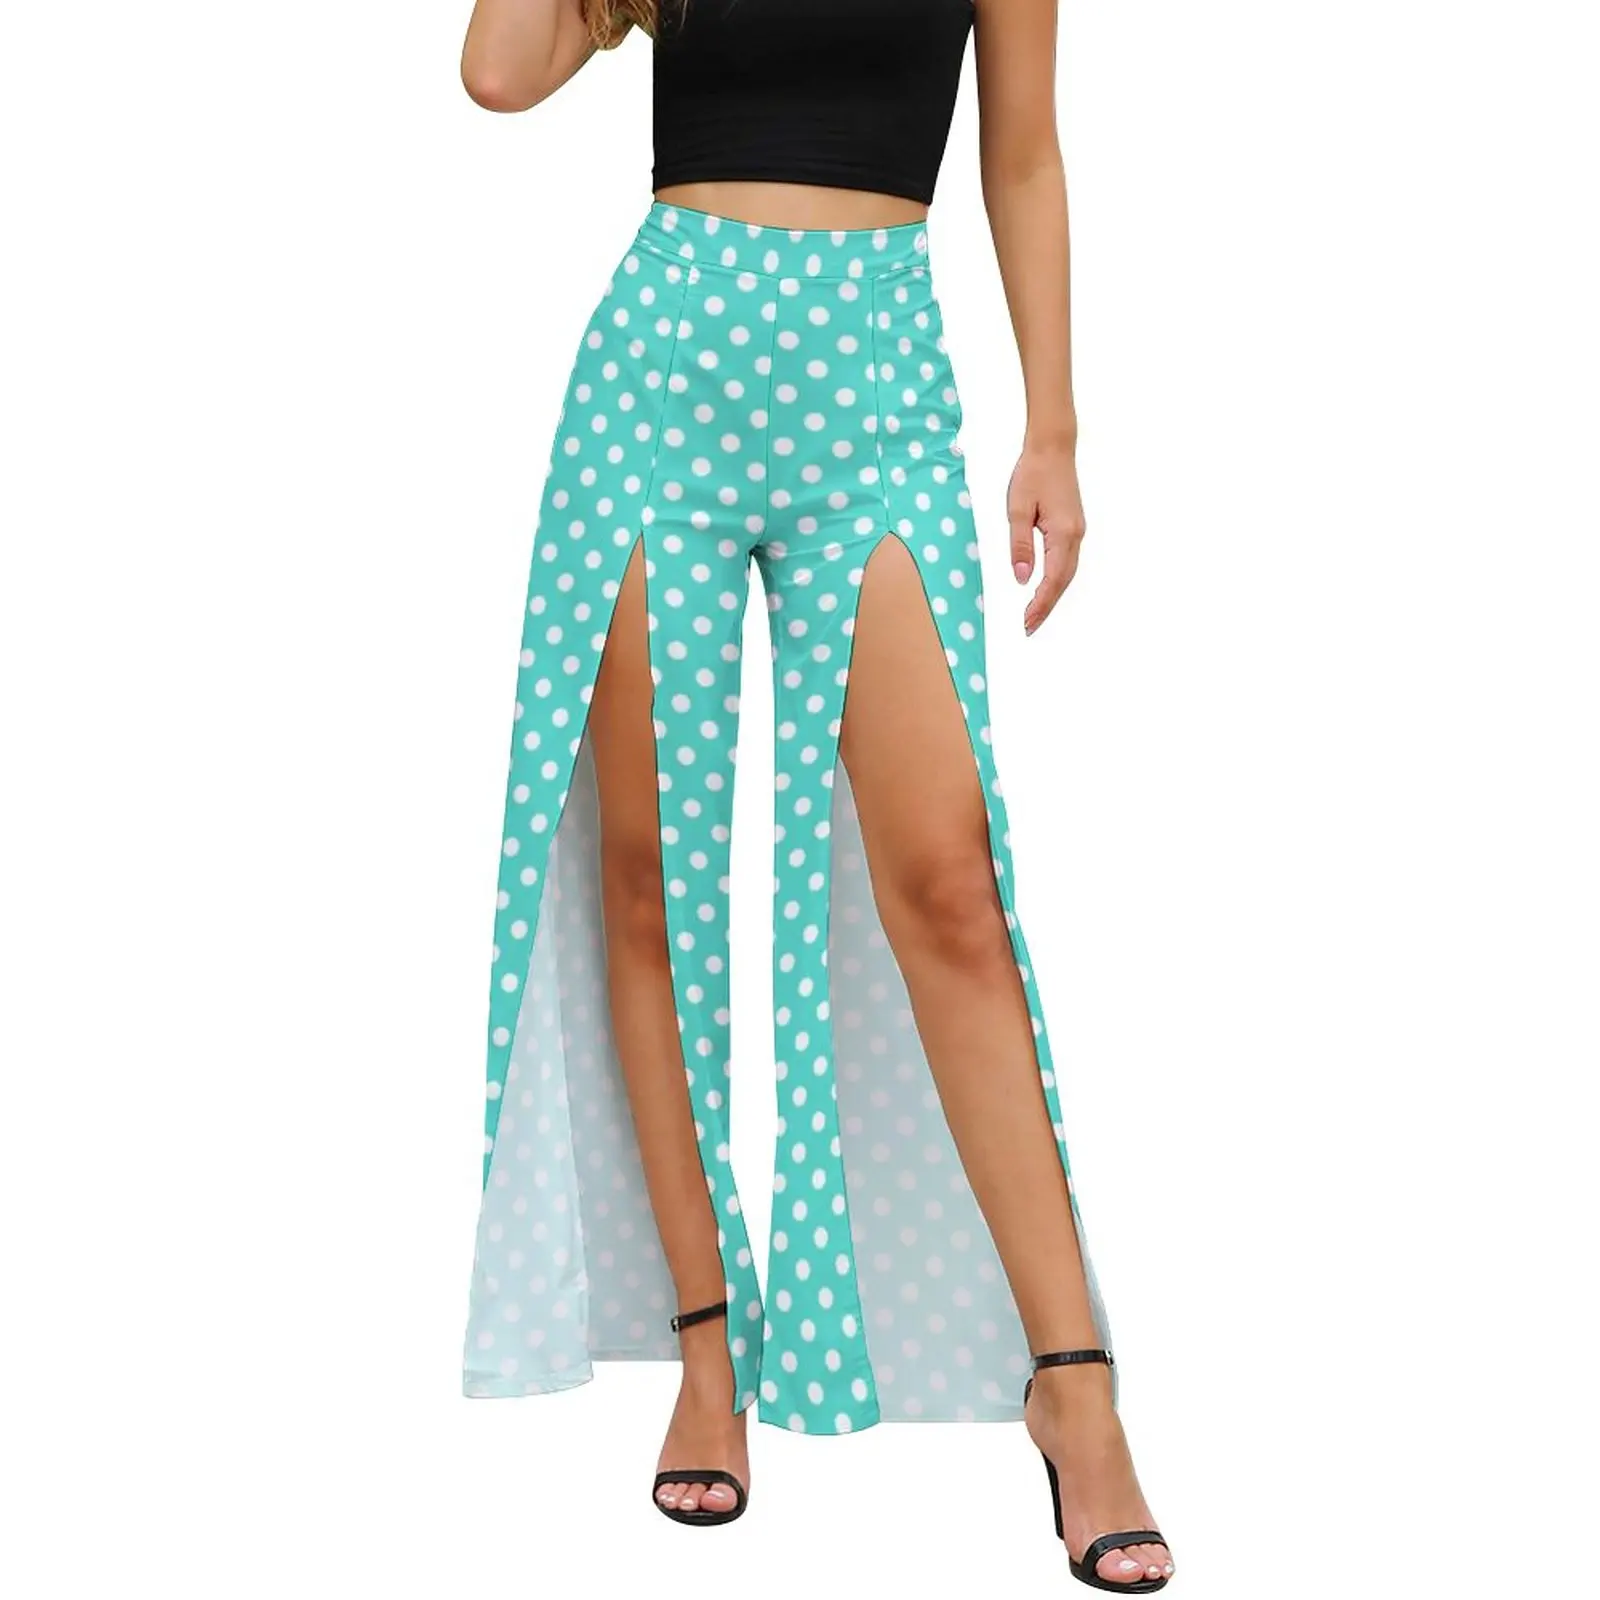 

Teal Blue Polka Dot Pants Daily Retro Turquoise Trendy Casual Wide Leg Pants Woman Slit Straight Streetwear Printed Trousers